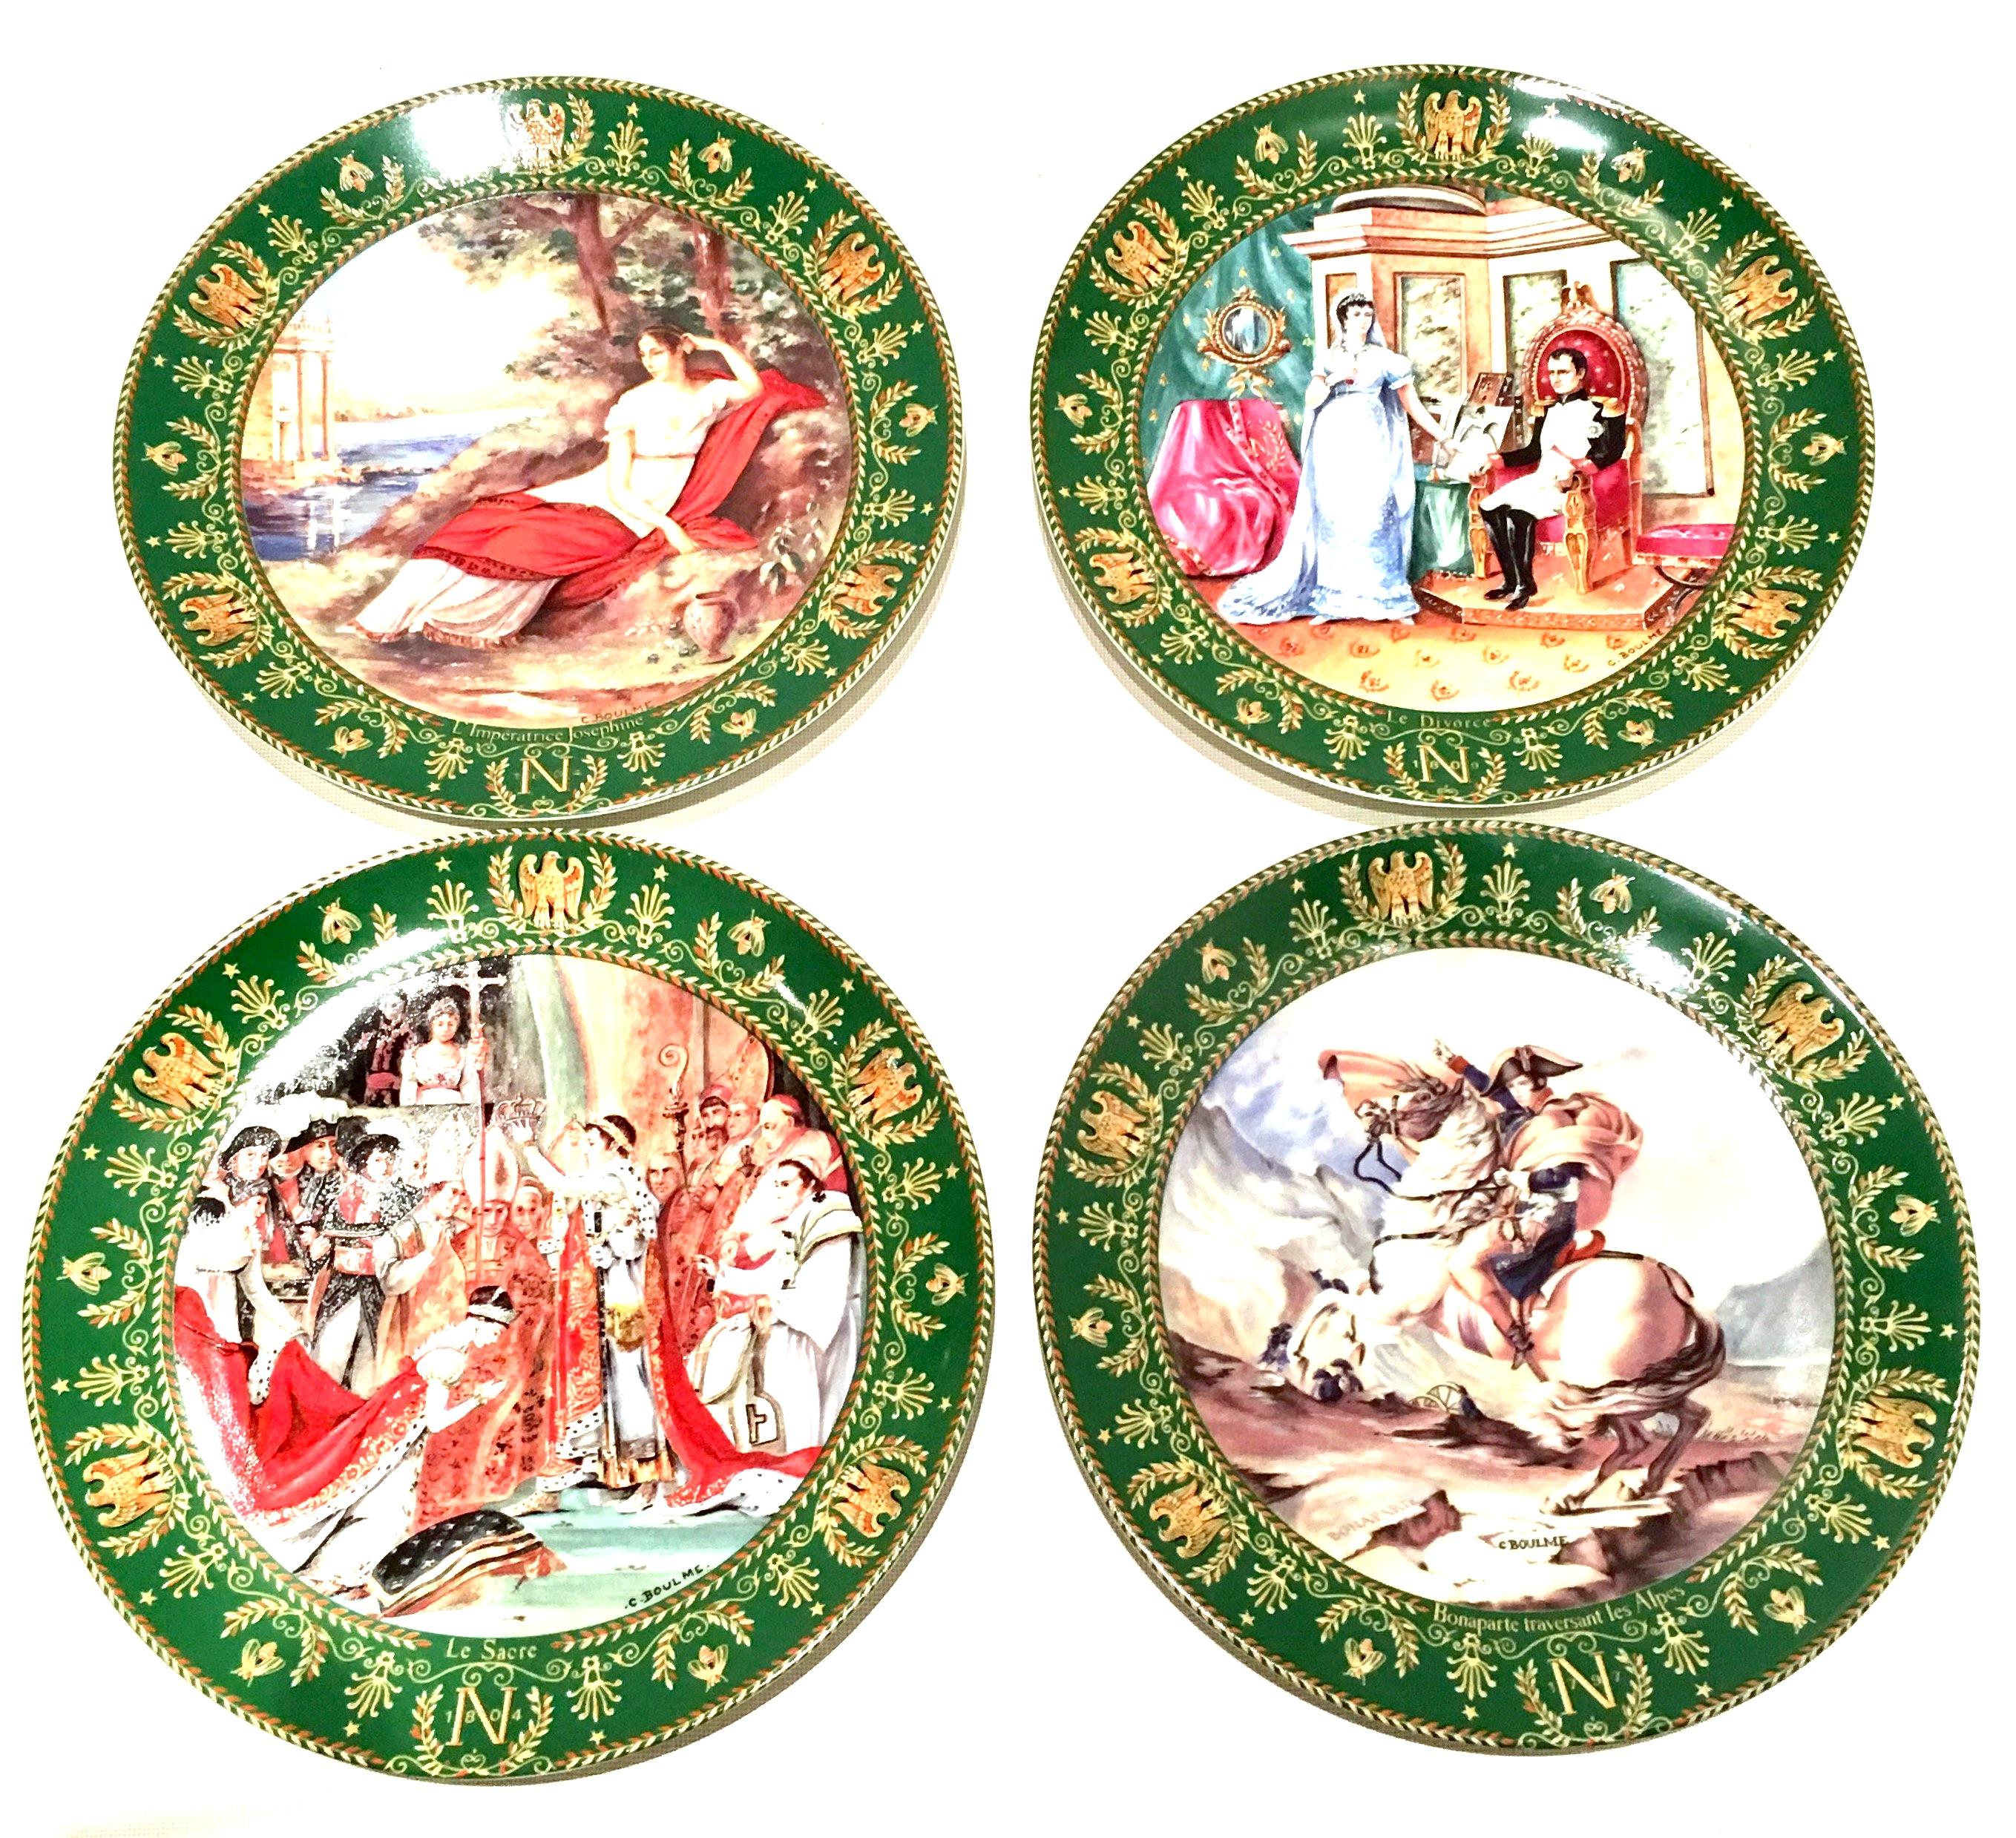 1980s French Limoges porcelain hand painted limited edition plates Napoleon & Josephine Limoge by, D'arceua Limoges-Set of four. Each plate is signed and edition numbered and dated with a poem description of the motif on the backside and